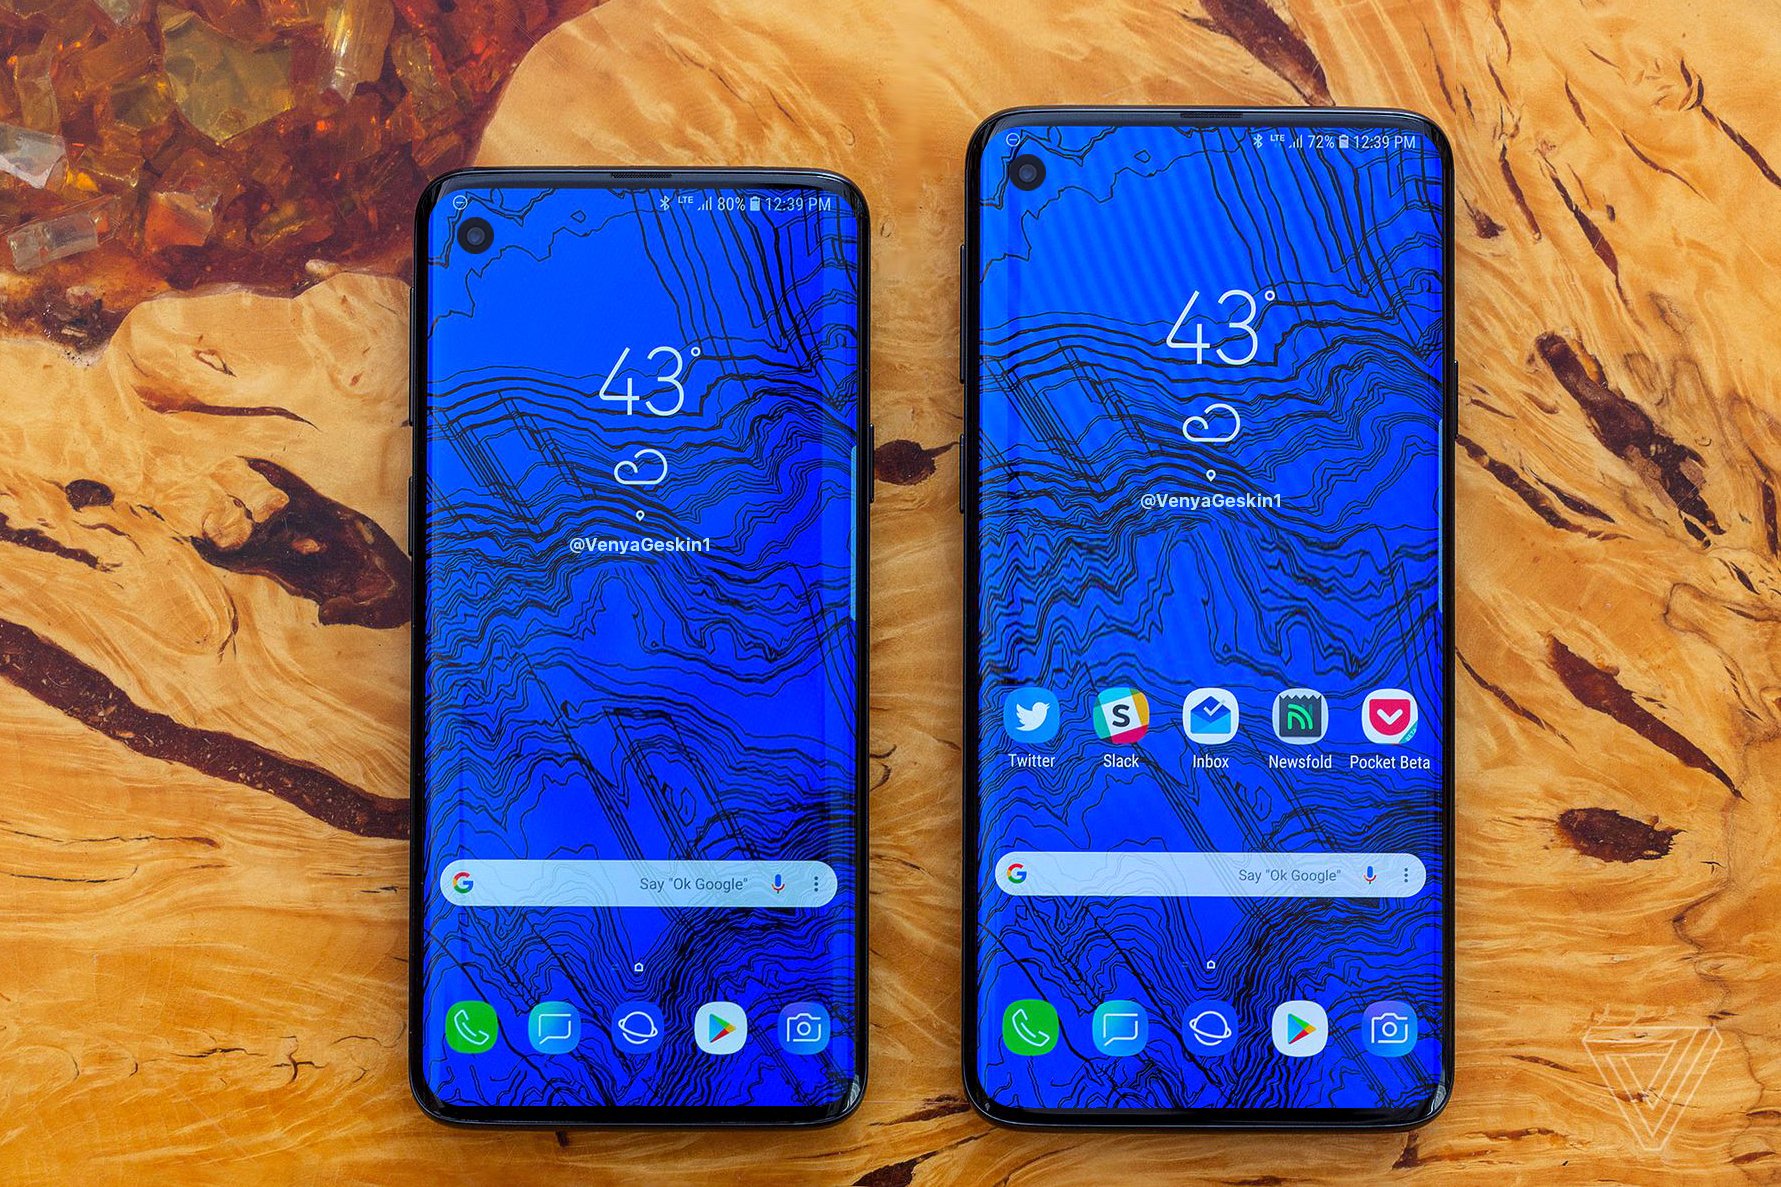 Samsung sends out invitations for Galaxy S10 launch 9